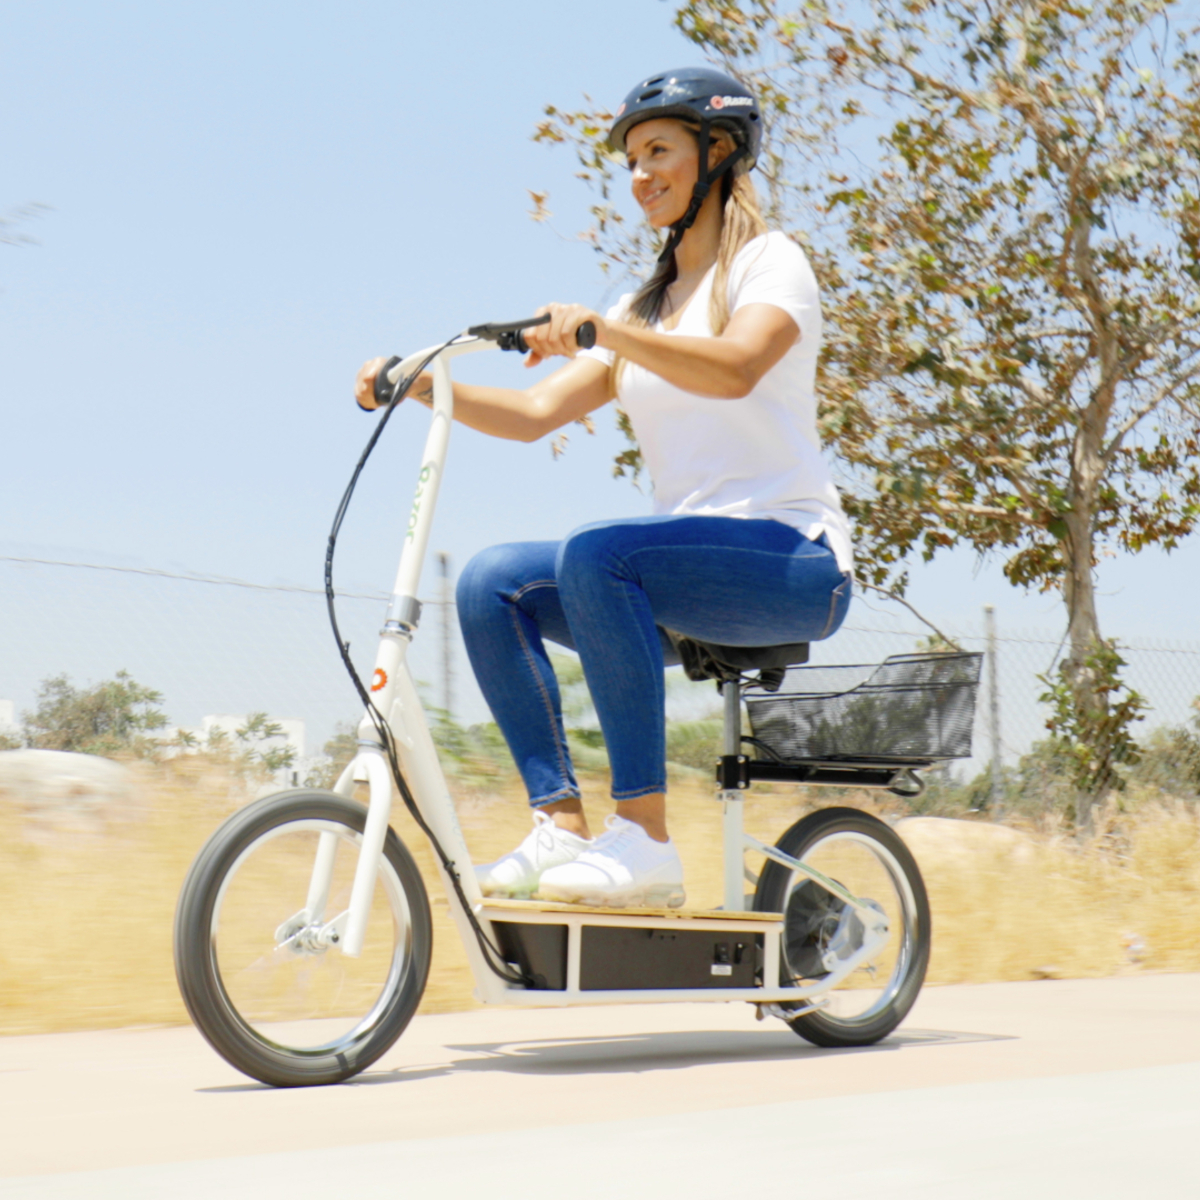 walmart slashes prices on electric bikes and razor e scooters for labor day 36 volt ecosmart metro scooter  1